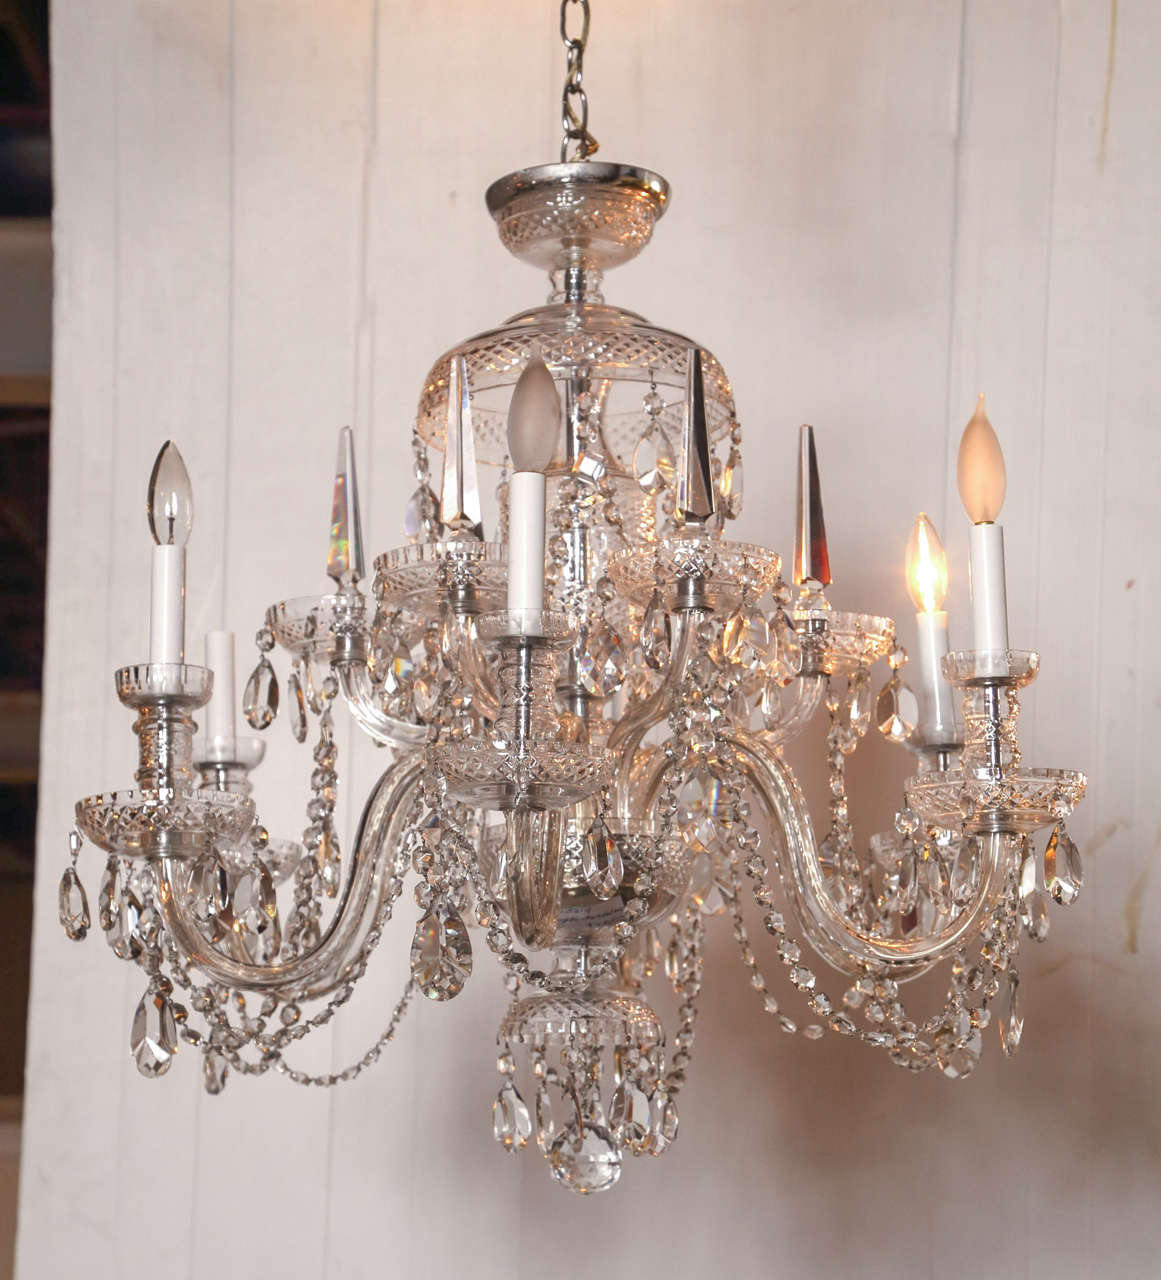 This fine  Chandelier having twelve arms with large cups is indicative of the old world Georgian look. The top having a rare cut crystal canopy with a cut crystal dome leading to a group of twelve cut arms and several candle snuffer arms. The